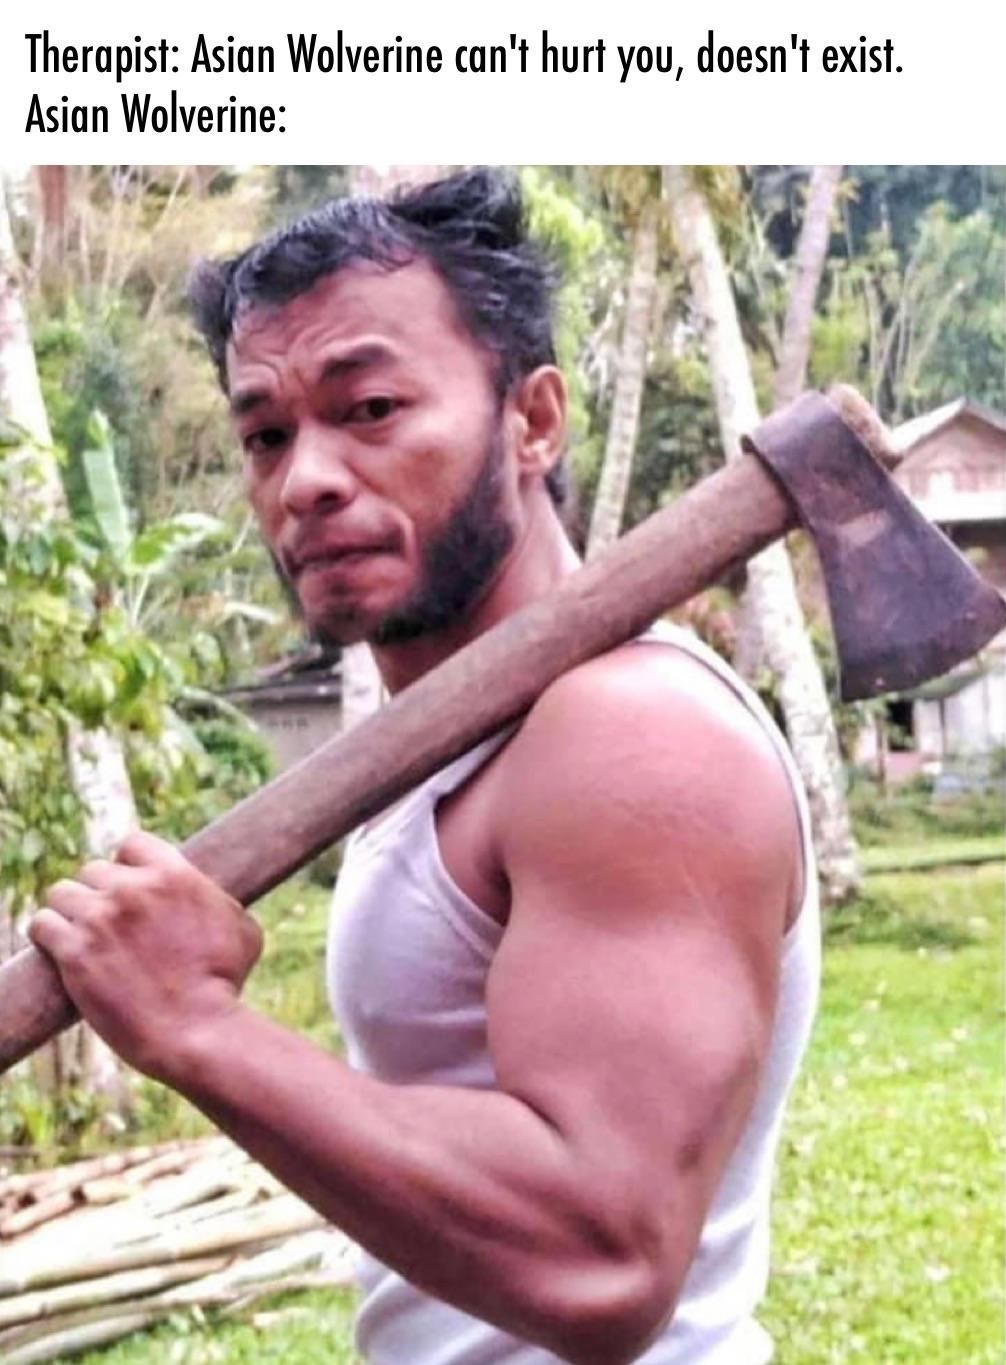 dank memes - funny memes - barechestedness - Therapist Asian Wolverine can't hurt you, doesn't exist. Asian Wolverine